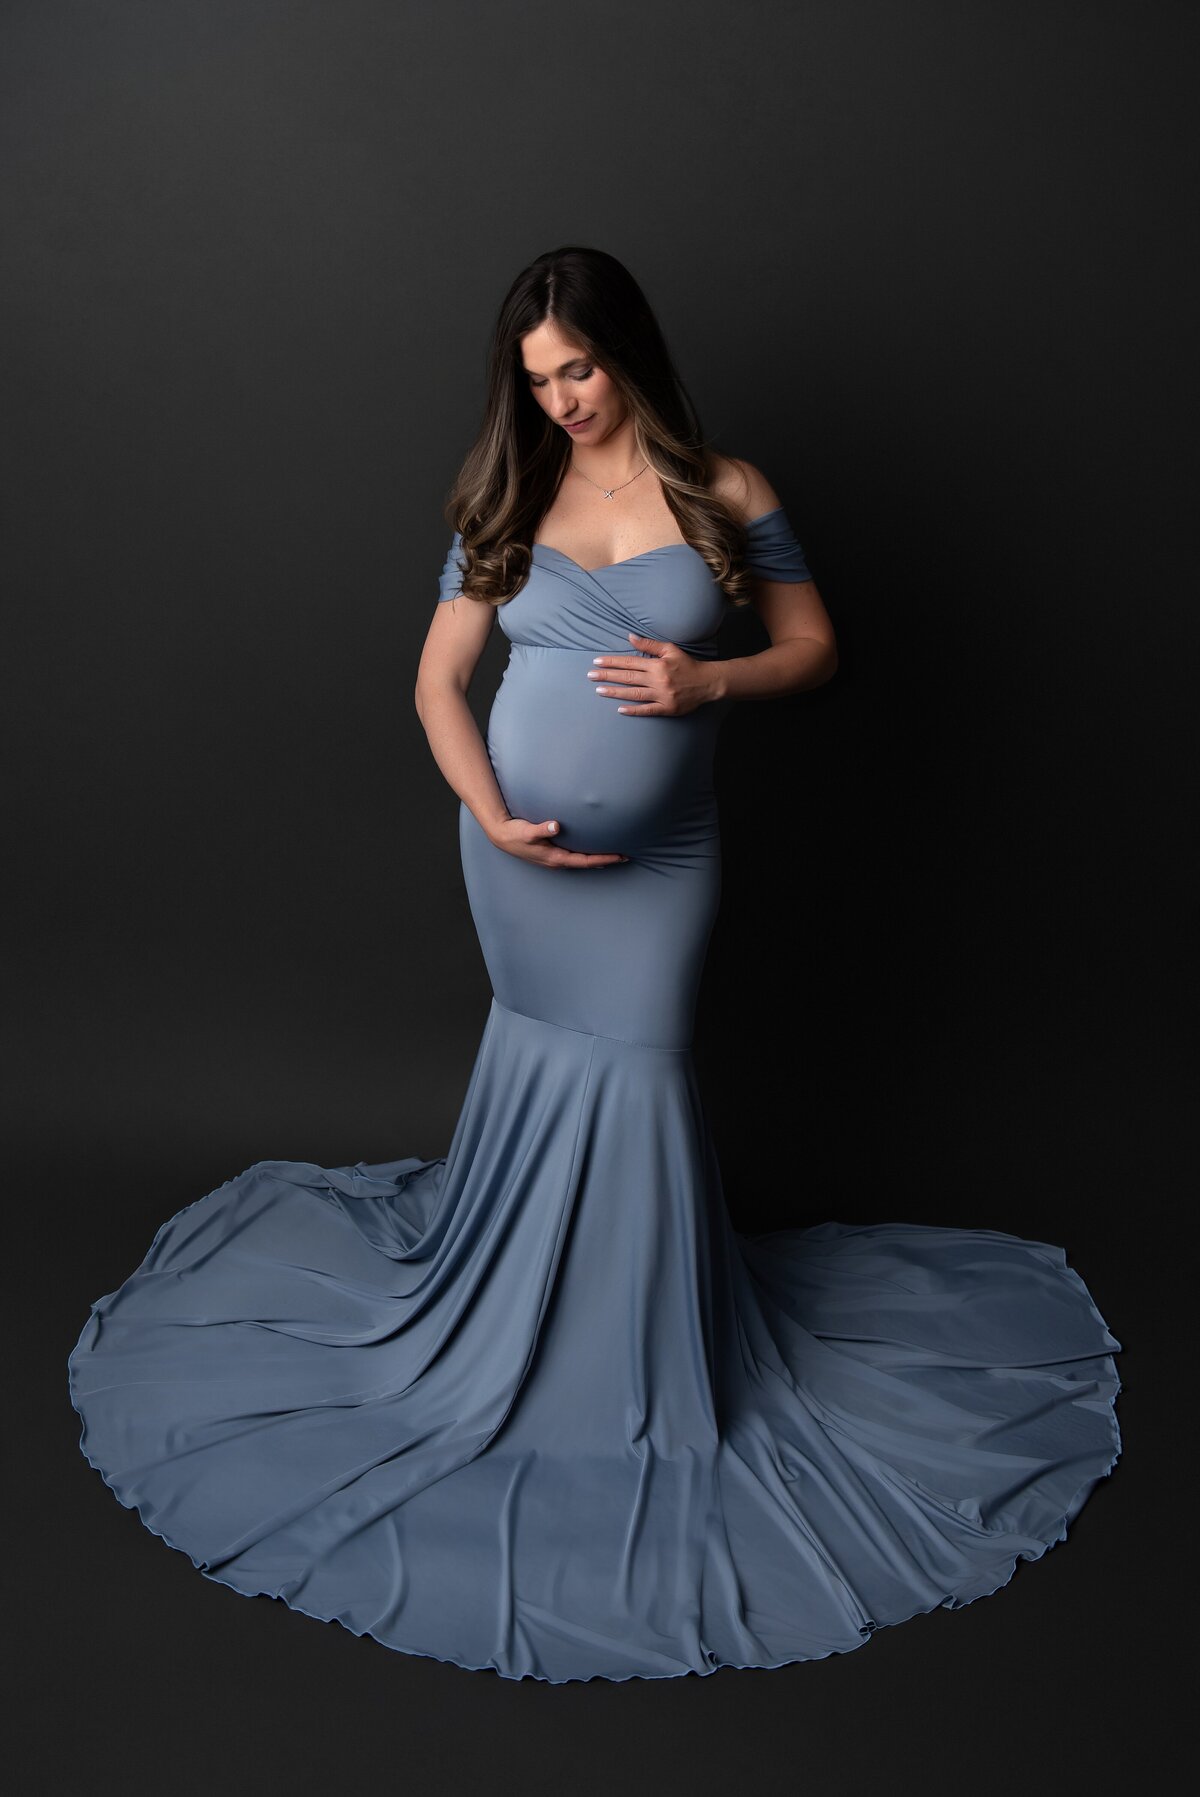 West Palm Beach studio maternity session with a blue and gray theme.